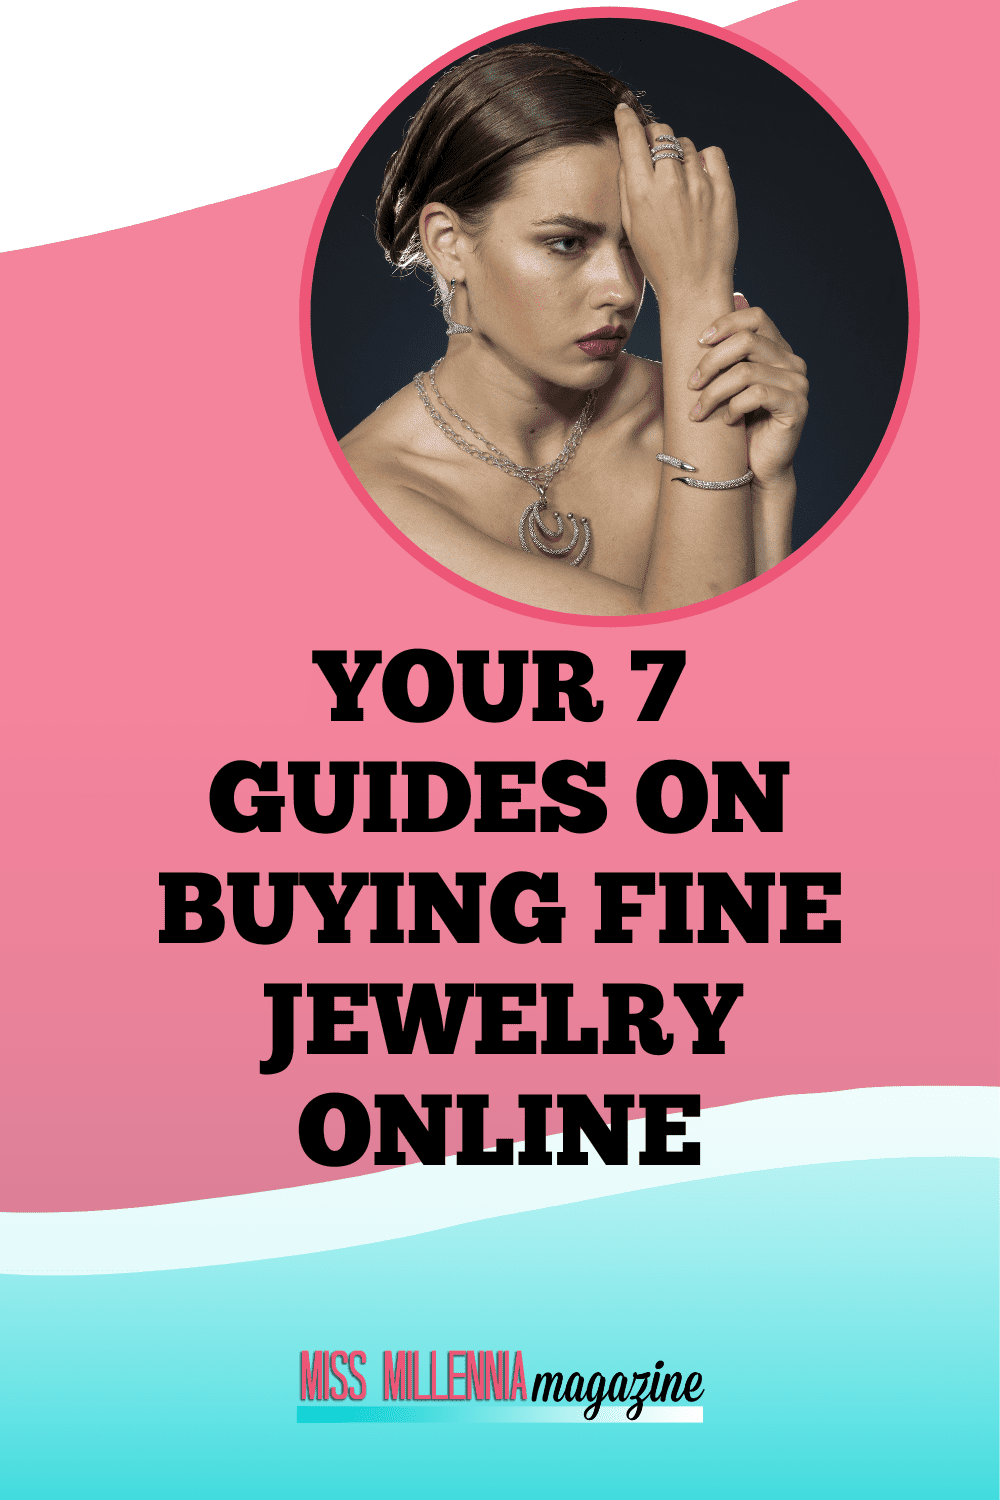 Your 7 Guides on Buying Fine Jewelry Online